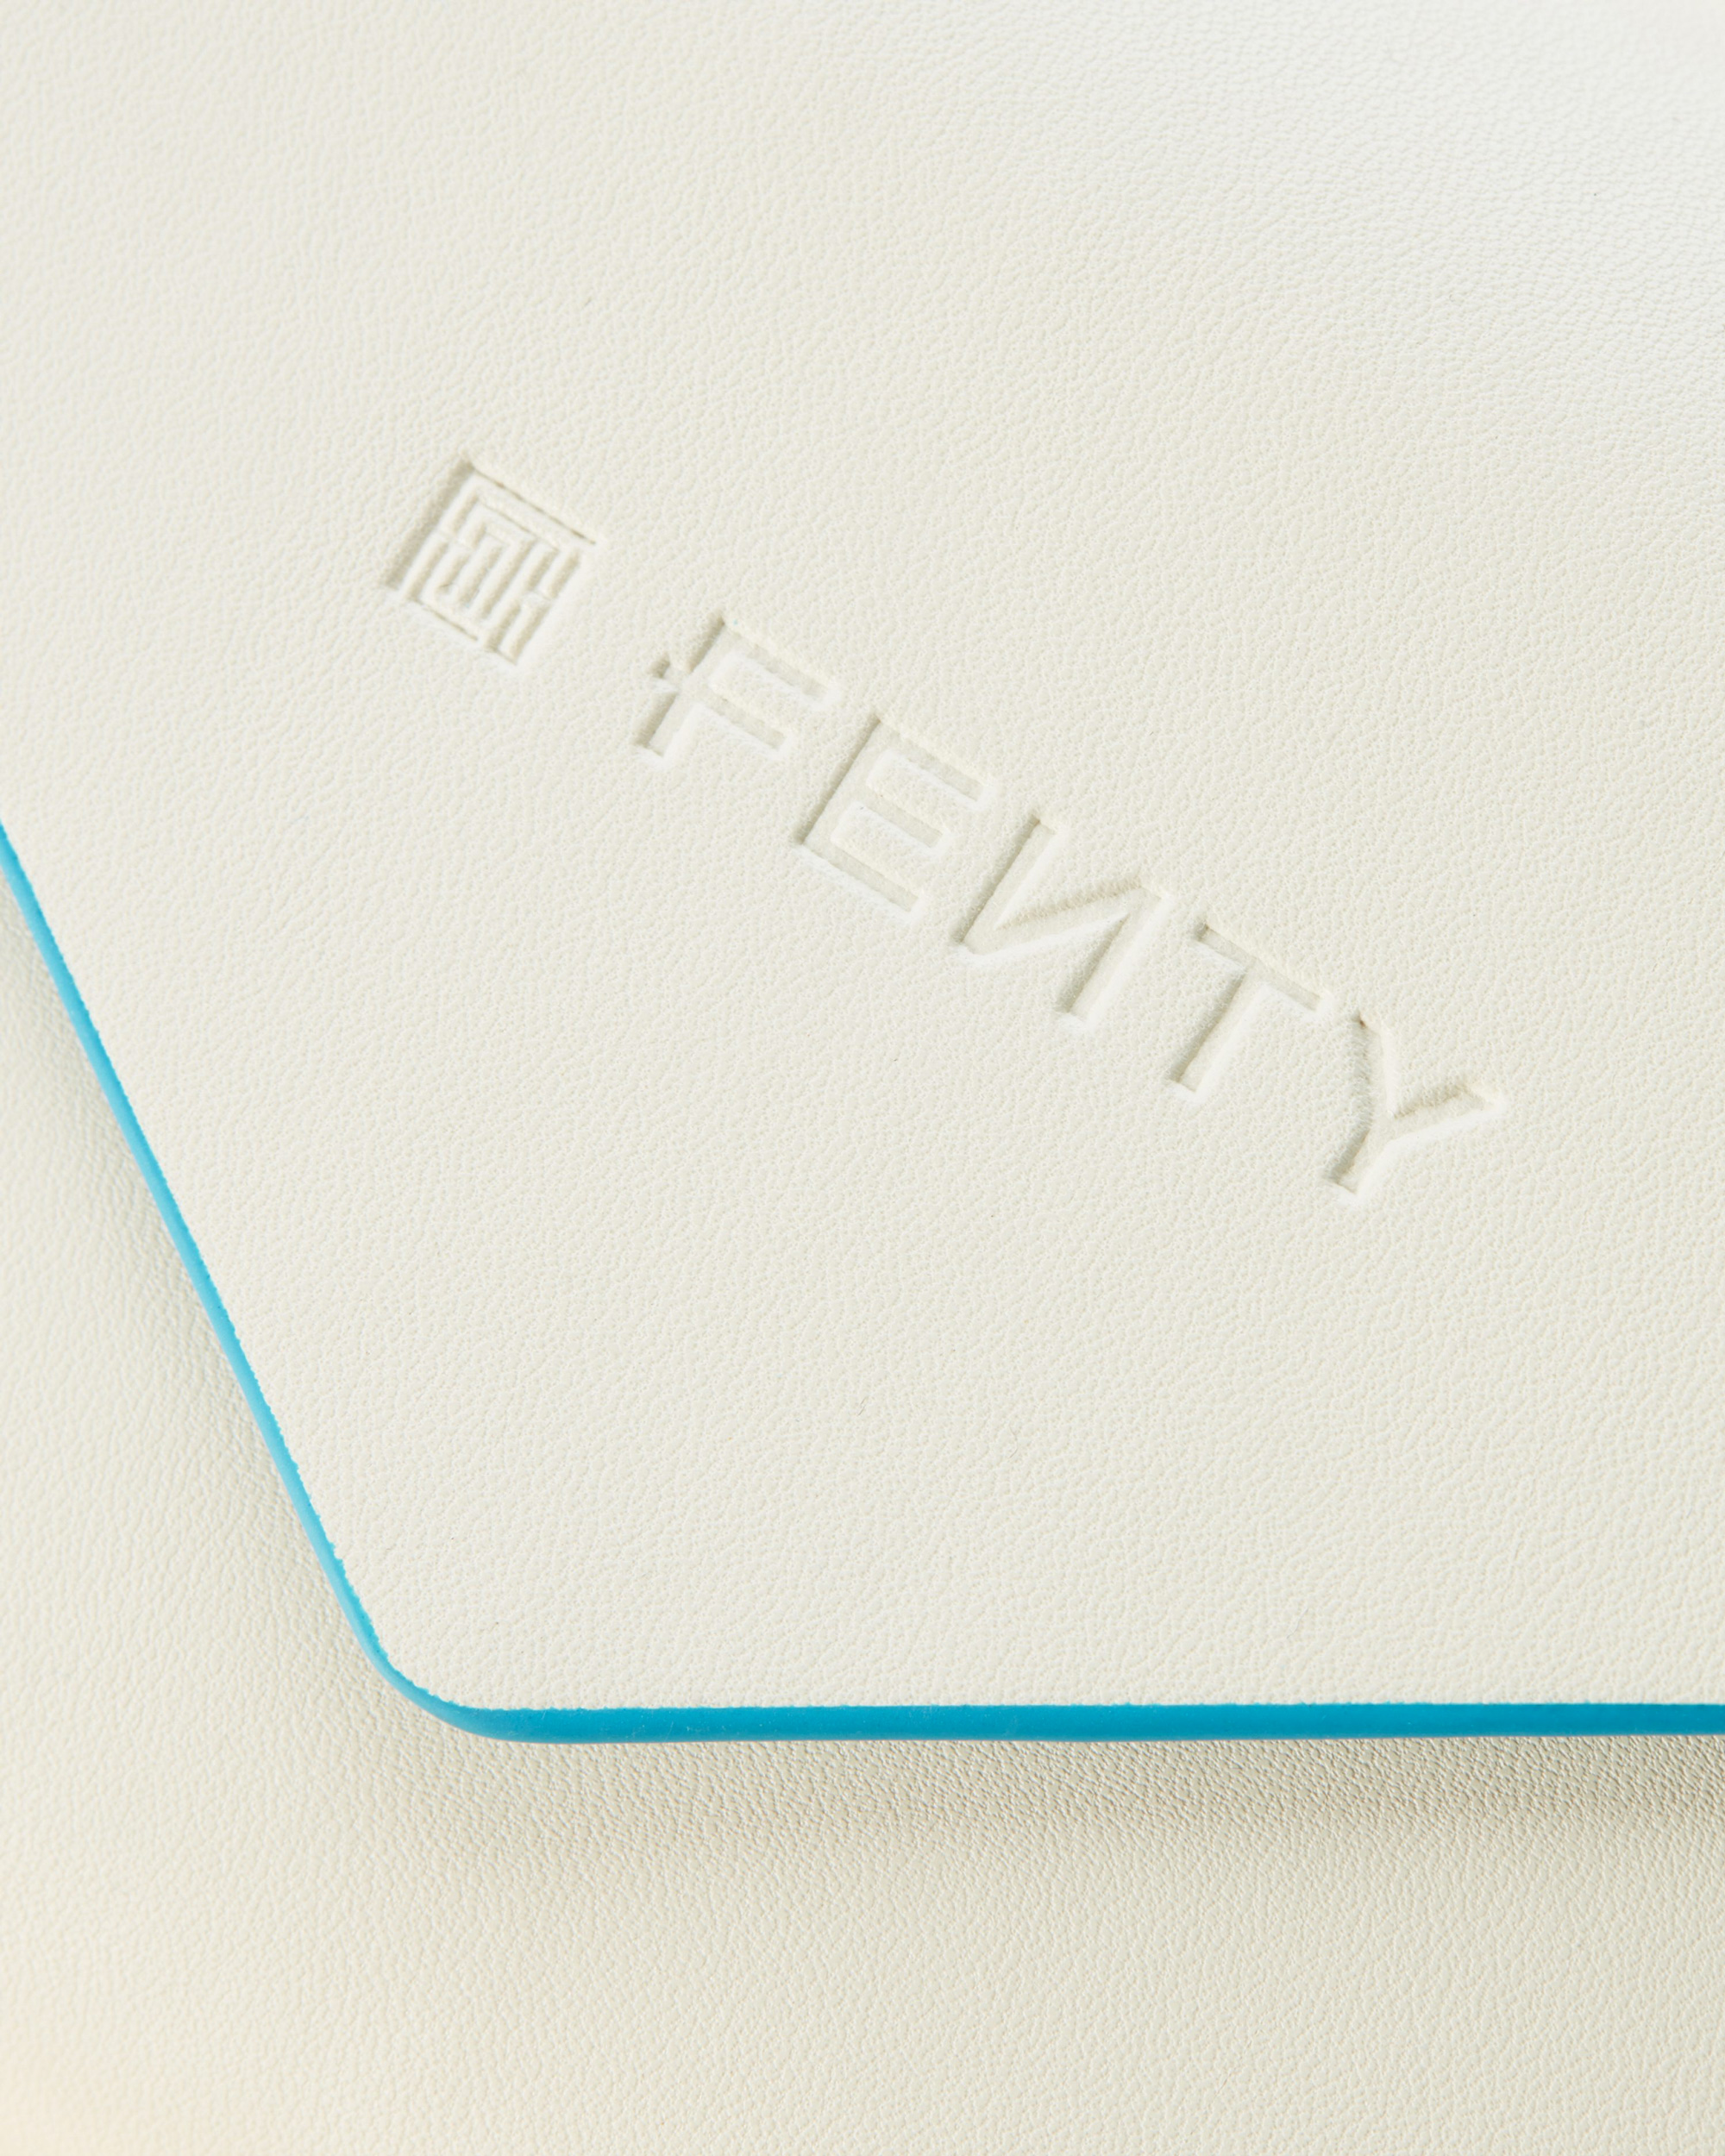 New Logo, Identity, and Packaging for FENTY by Commission